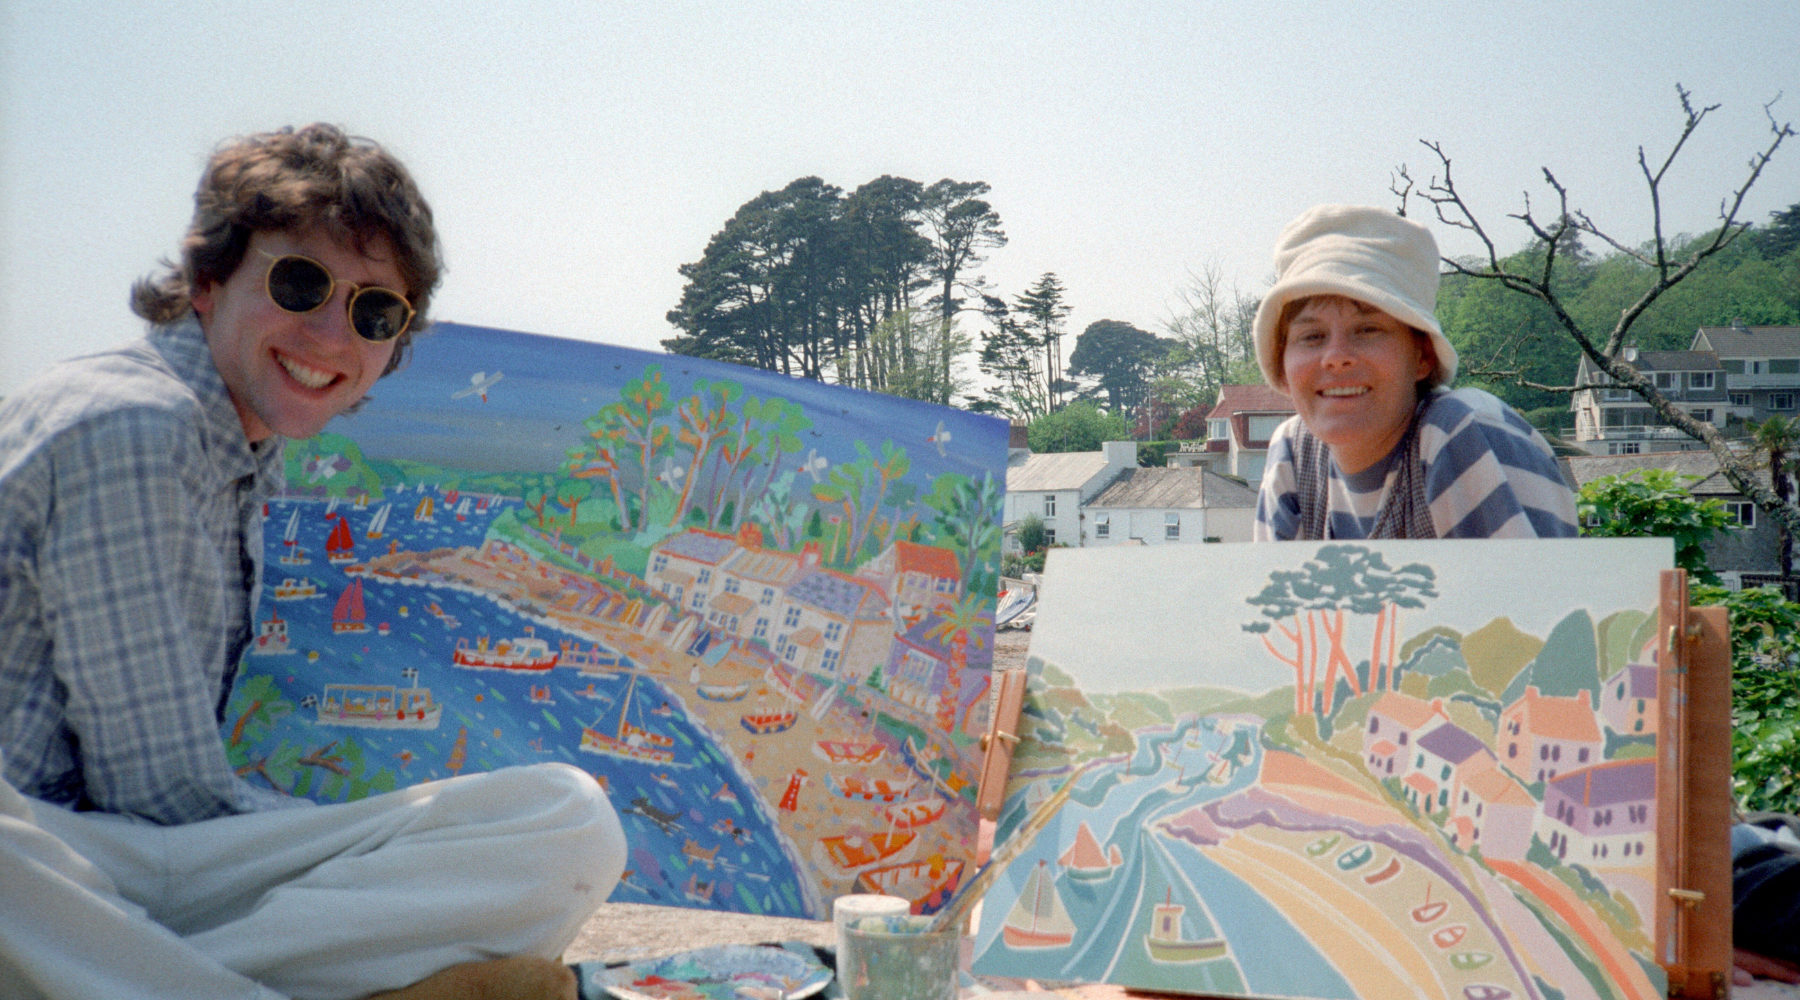 Cornwall artists John Dyer and Joanne Short pictured painting on the cliffs at Helford Passage on the South Coast of Cornwall